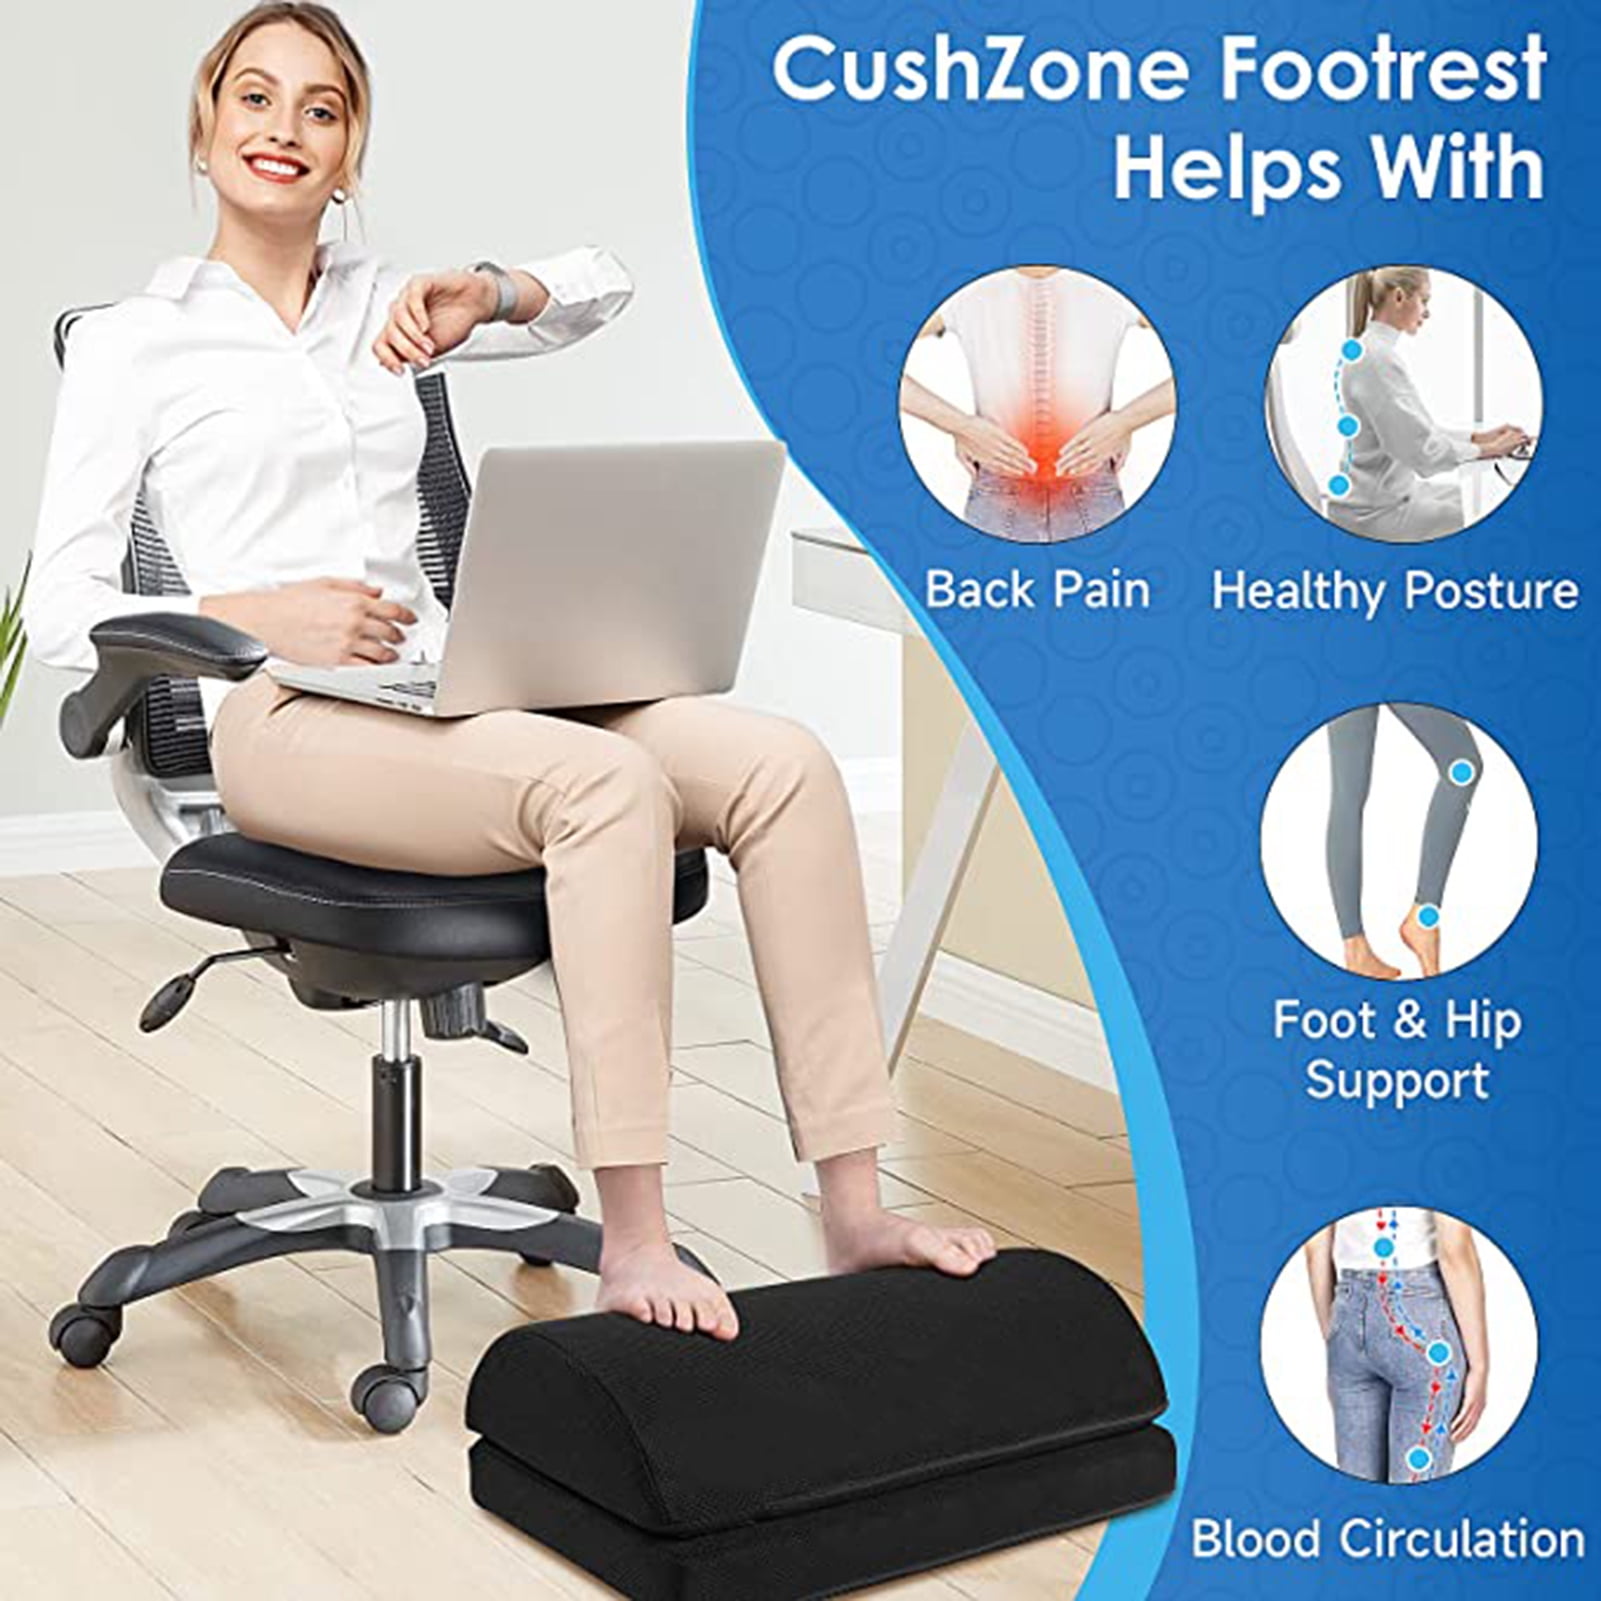 Dikdoc Foot Rest for Under Desk at Work, Home Office Foot Stool, Ottoman Foot Massager for Plantar Fasciitis Relief, Soft Silicone Footrests, Anti-Fa